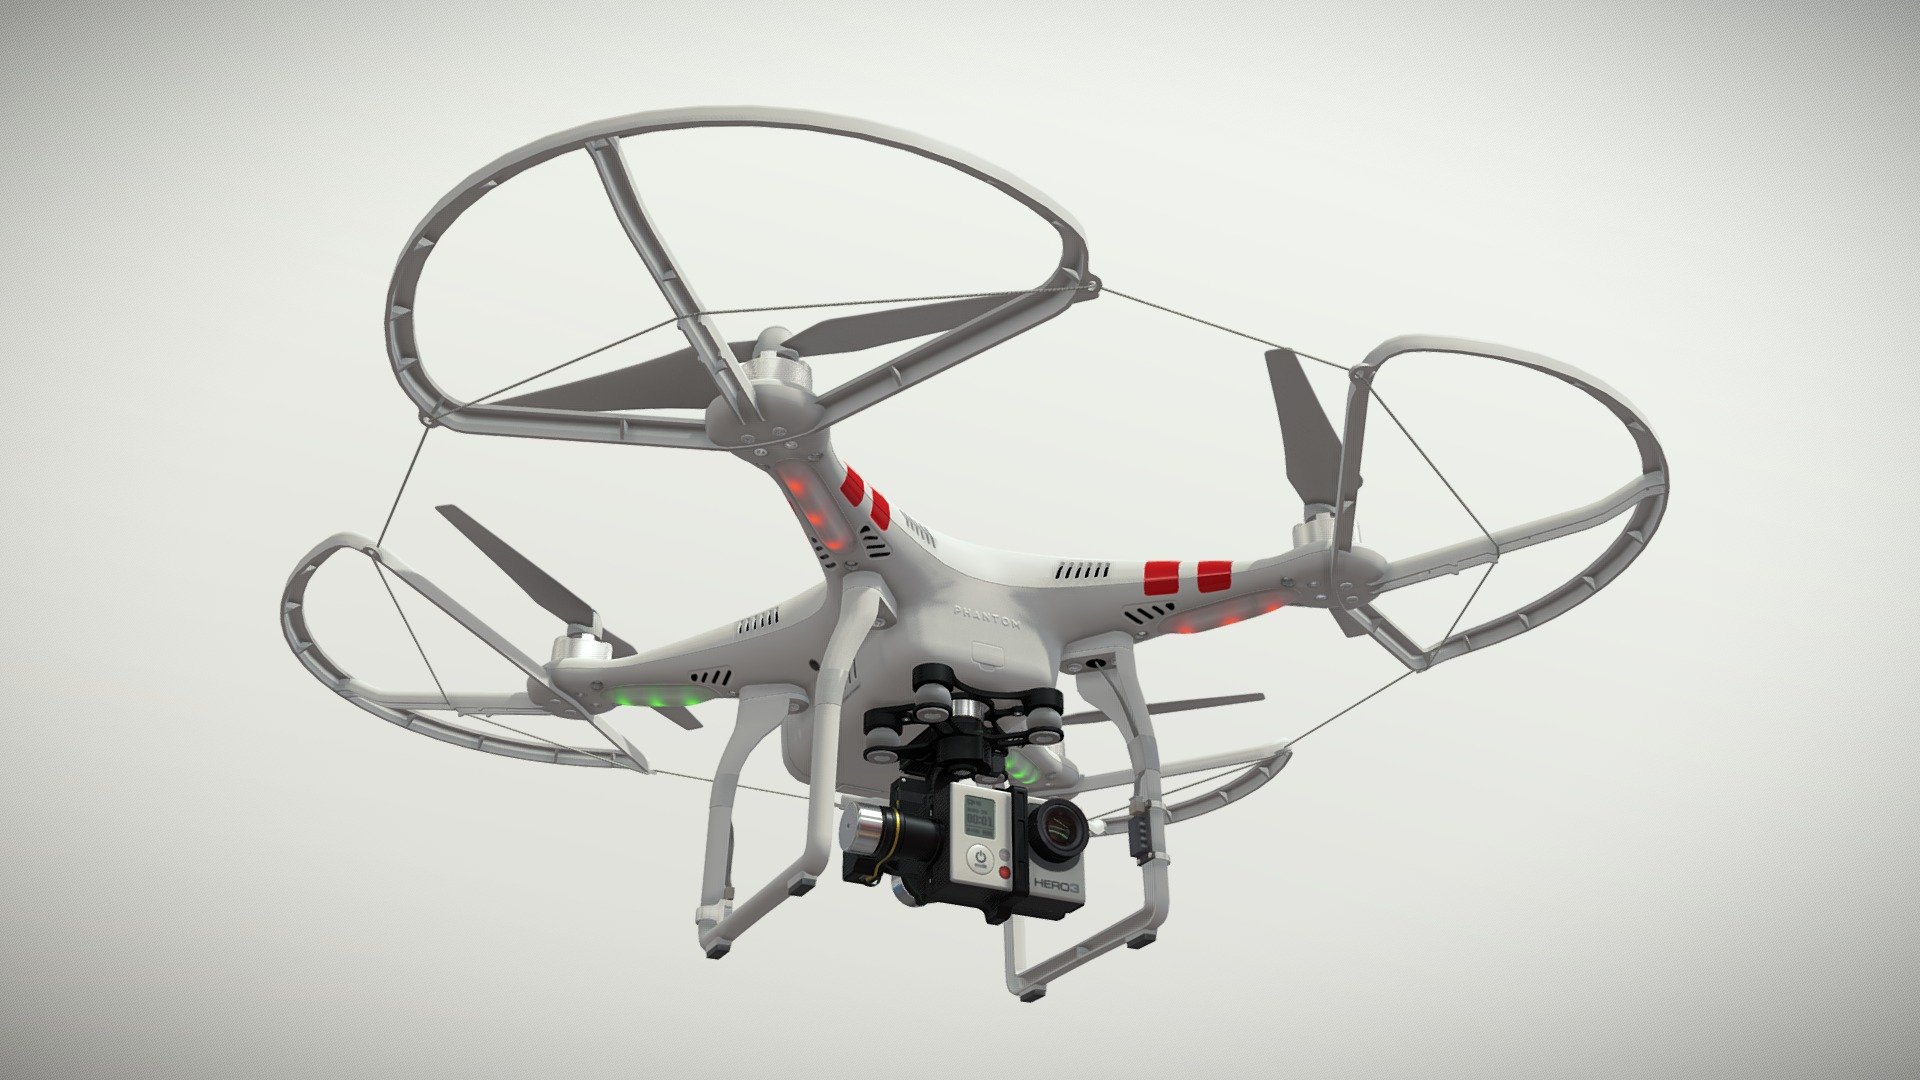 •   Let me present to you high-quality low-poly 3D model DJI Phantom 2 Quadcopter with Propeller Guard, Zenmuse H4-3D gimbal for GoPro Hero3-4 and GoPro HERO3 action camera. Modeling was made with ortho-photos of real quadcopter, camera and gimbal that is why all details of design are recreated most authentically.

•    This model consists of a few meshes, it is low-polygonal and it has four materials.

•   The total of the main textures is 14. Resolution of all textures is from 2048 to 4096 pixels square aspect ratio in .png format. Also there is original texture file .PSD format in separate archive.

•   Polygon count of the model is – 28961.

•   The model has correct dimensions in real-world scale.

•   To use the model in other 3D programs there are scenes saved in formats .fbx, .obj, .DAE, .max (2010 version).

Note: If you see some artifacts on the textures, it means compression works in the Viewer. We recommend setting HD quality for textures. But anyway, original textures have no artifacts 3d model